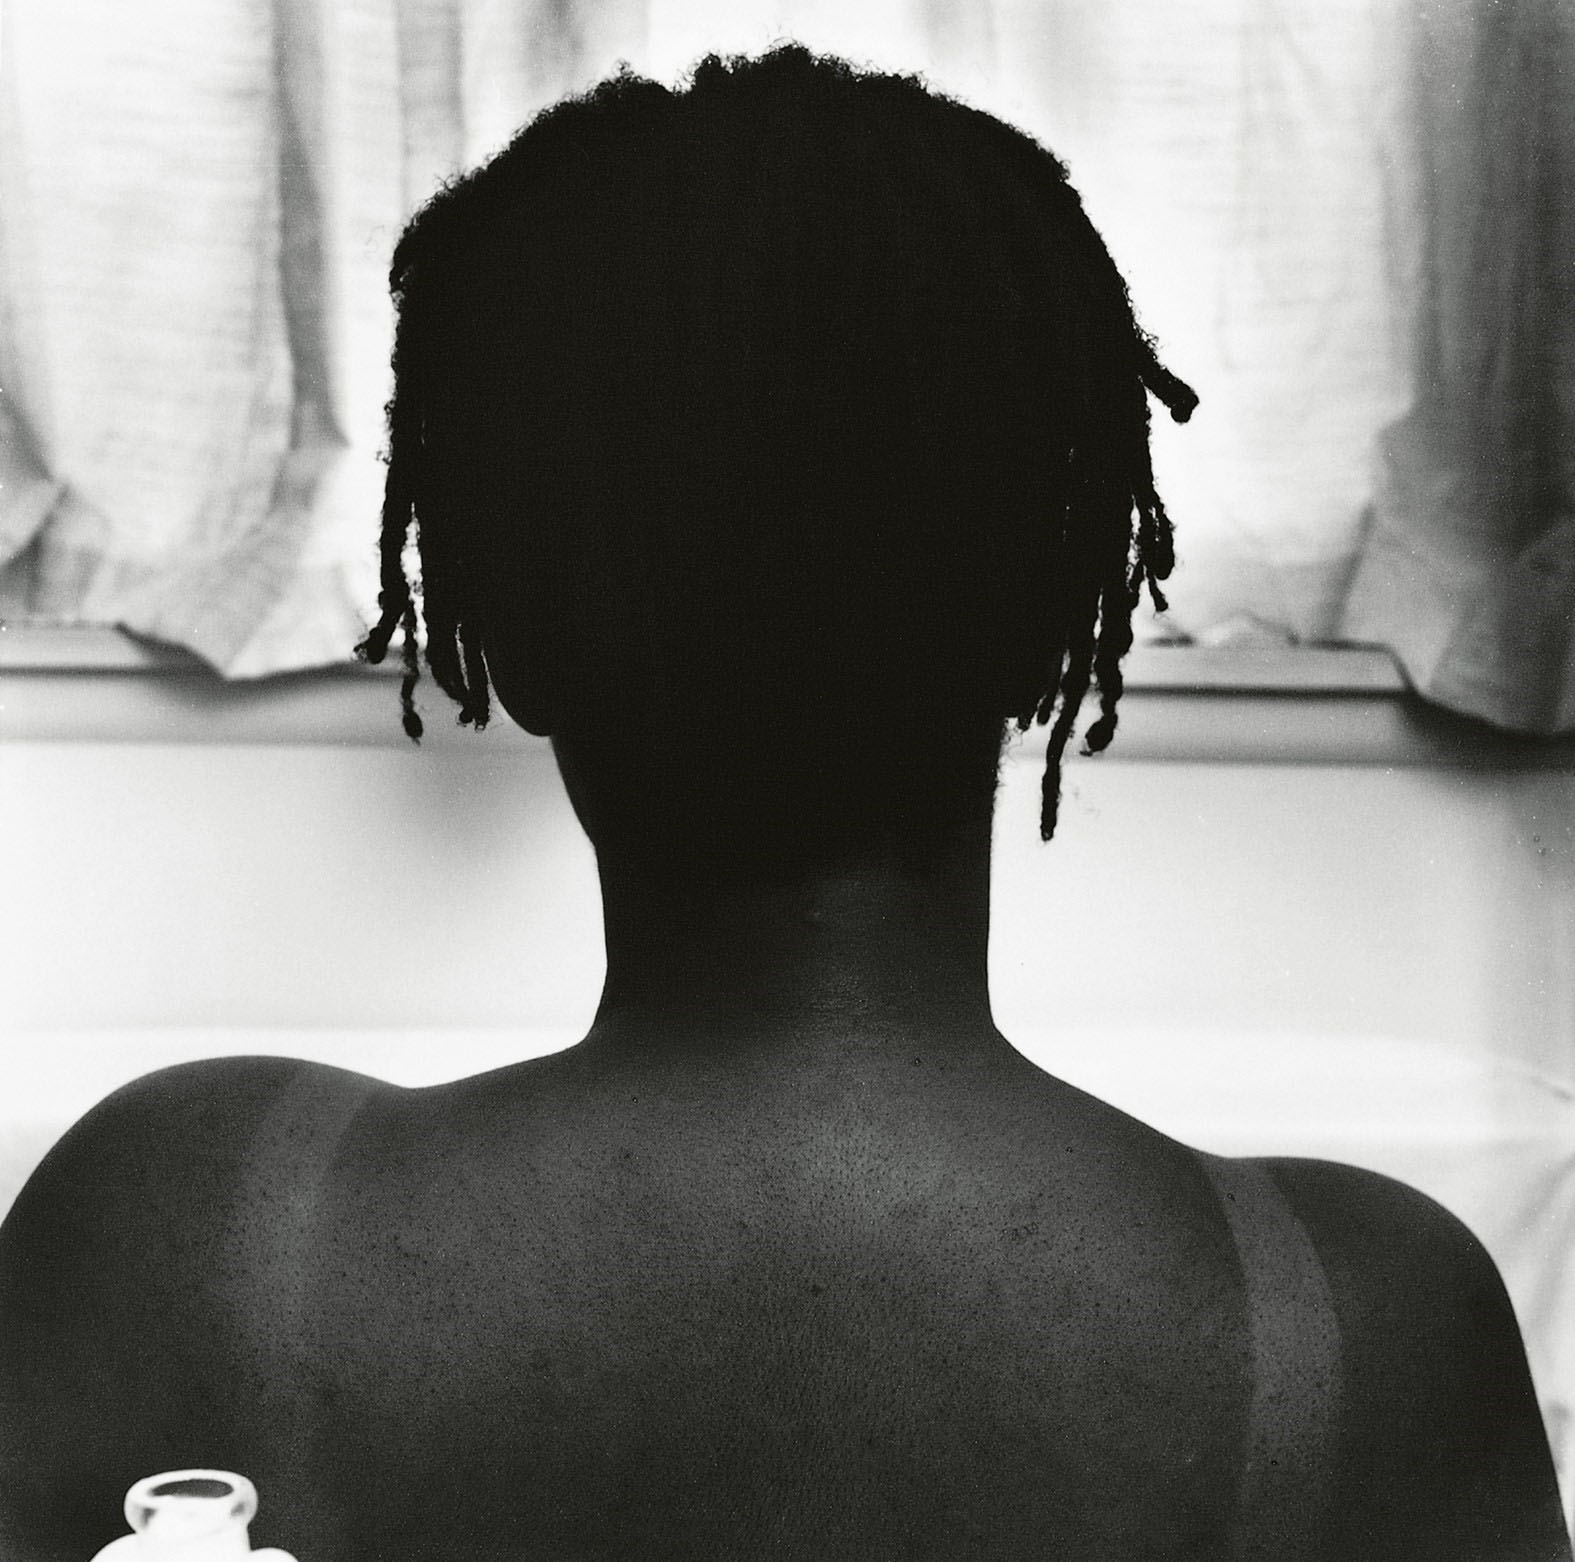 Maxine Walker, ‘Her’ from the series Black Beauty, 1991, from Shining Lights by Joy Gregory (ed.) (MACK, 2024)